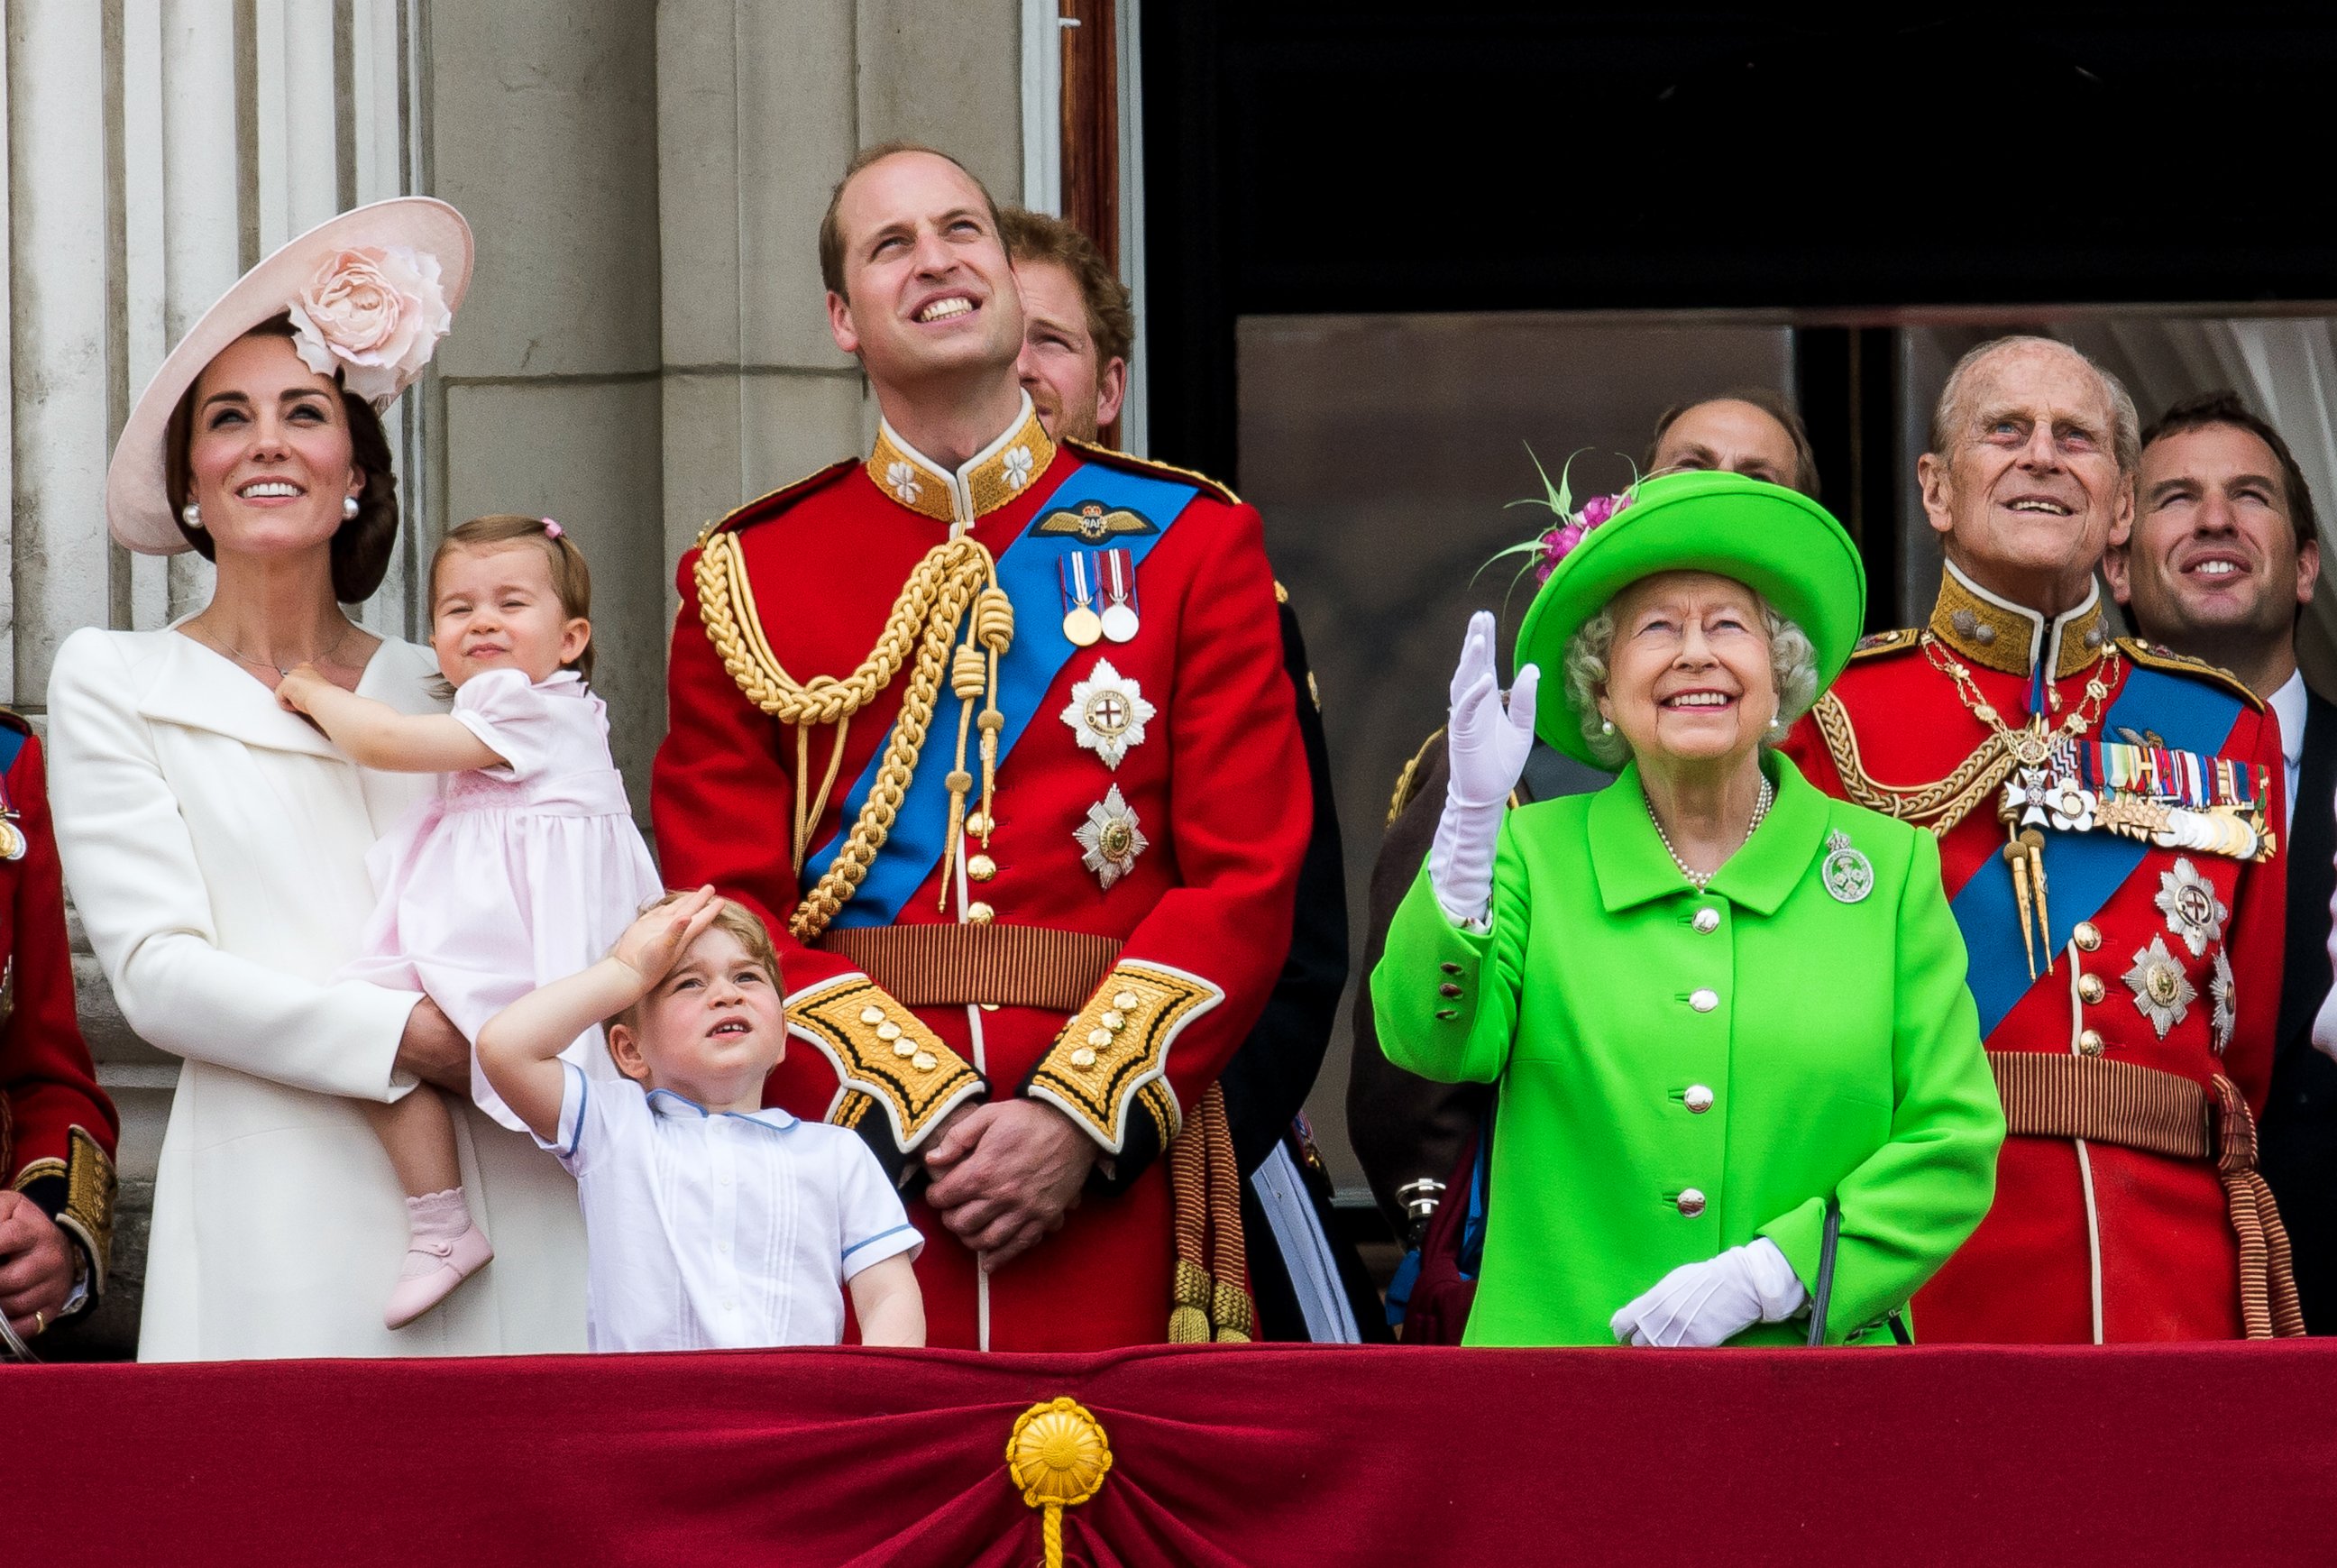 PHOTO: The Royal Family stand on the balcony during the Trooping the Color, this year marking the Queen's official 90th birthday at The Mall, June 11, 2016 in London.